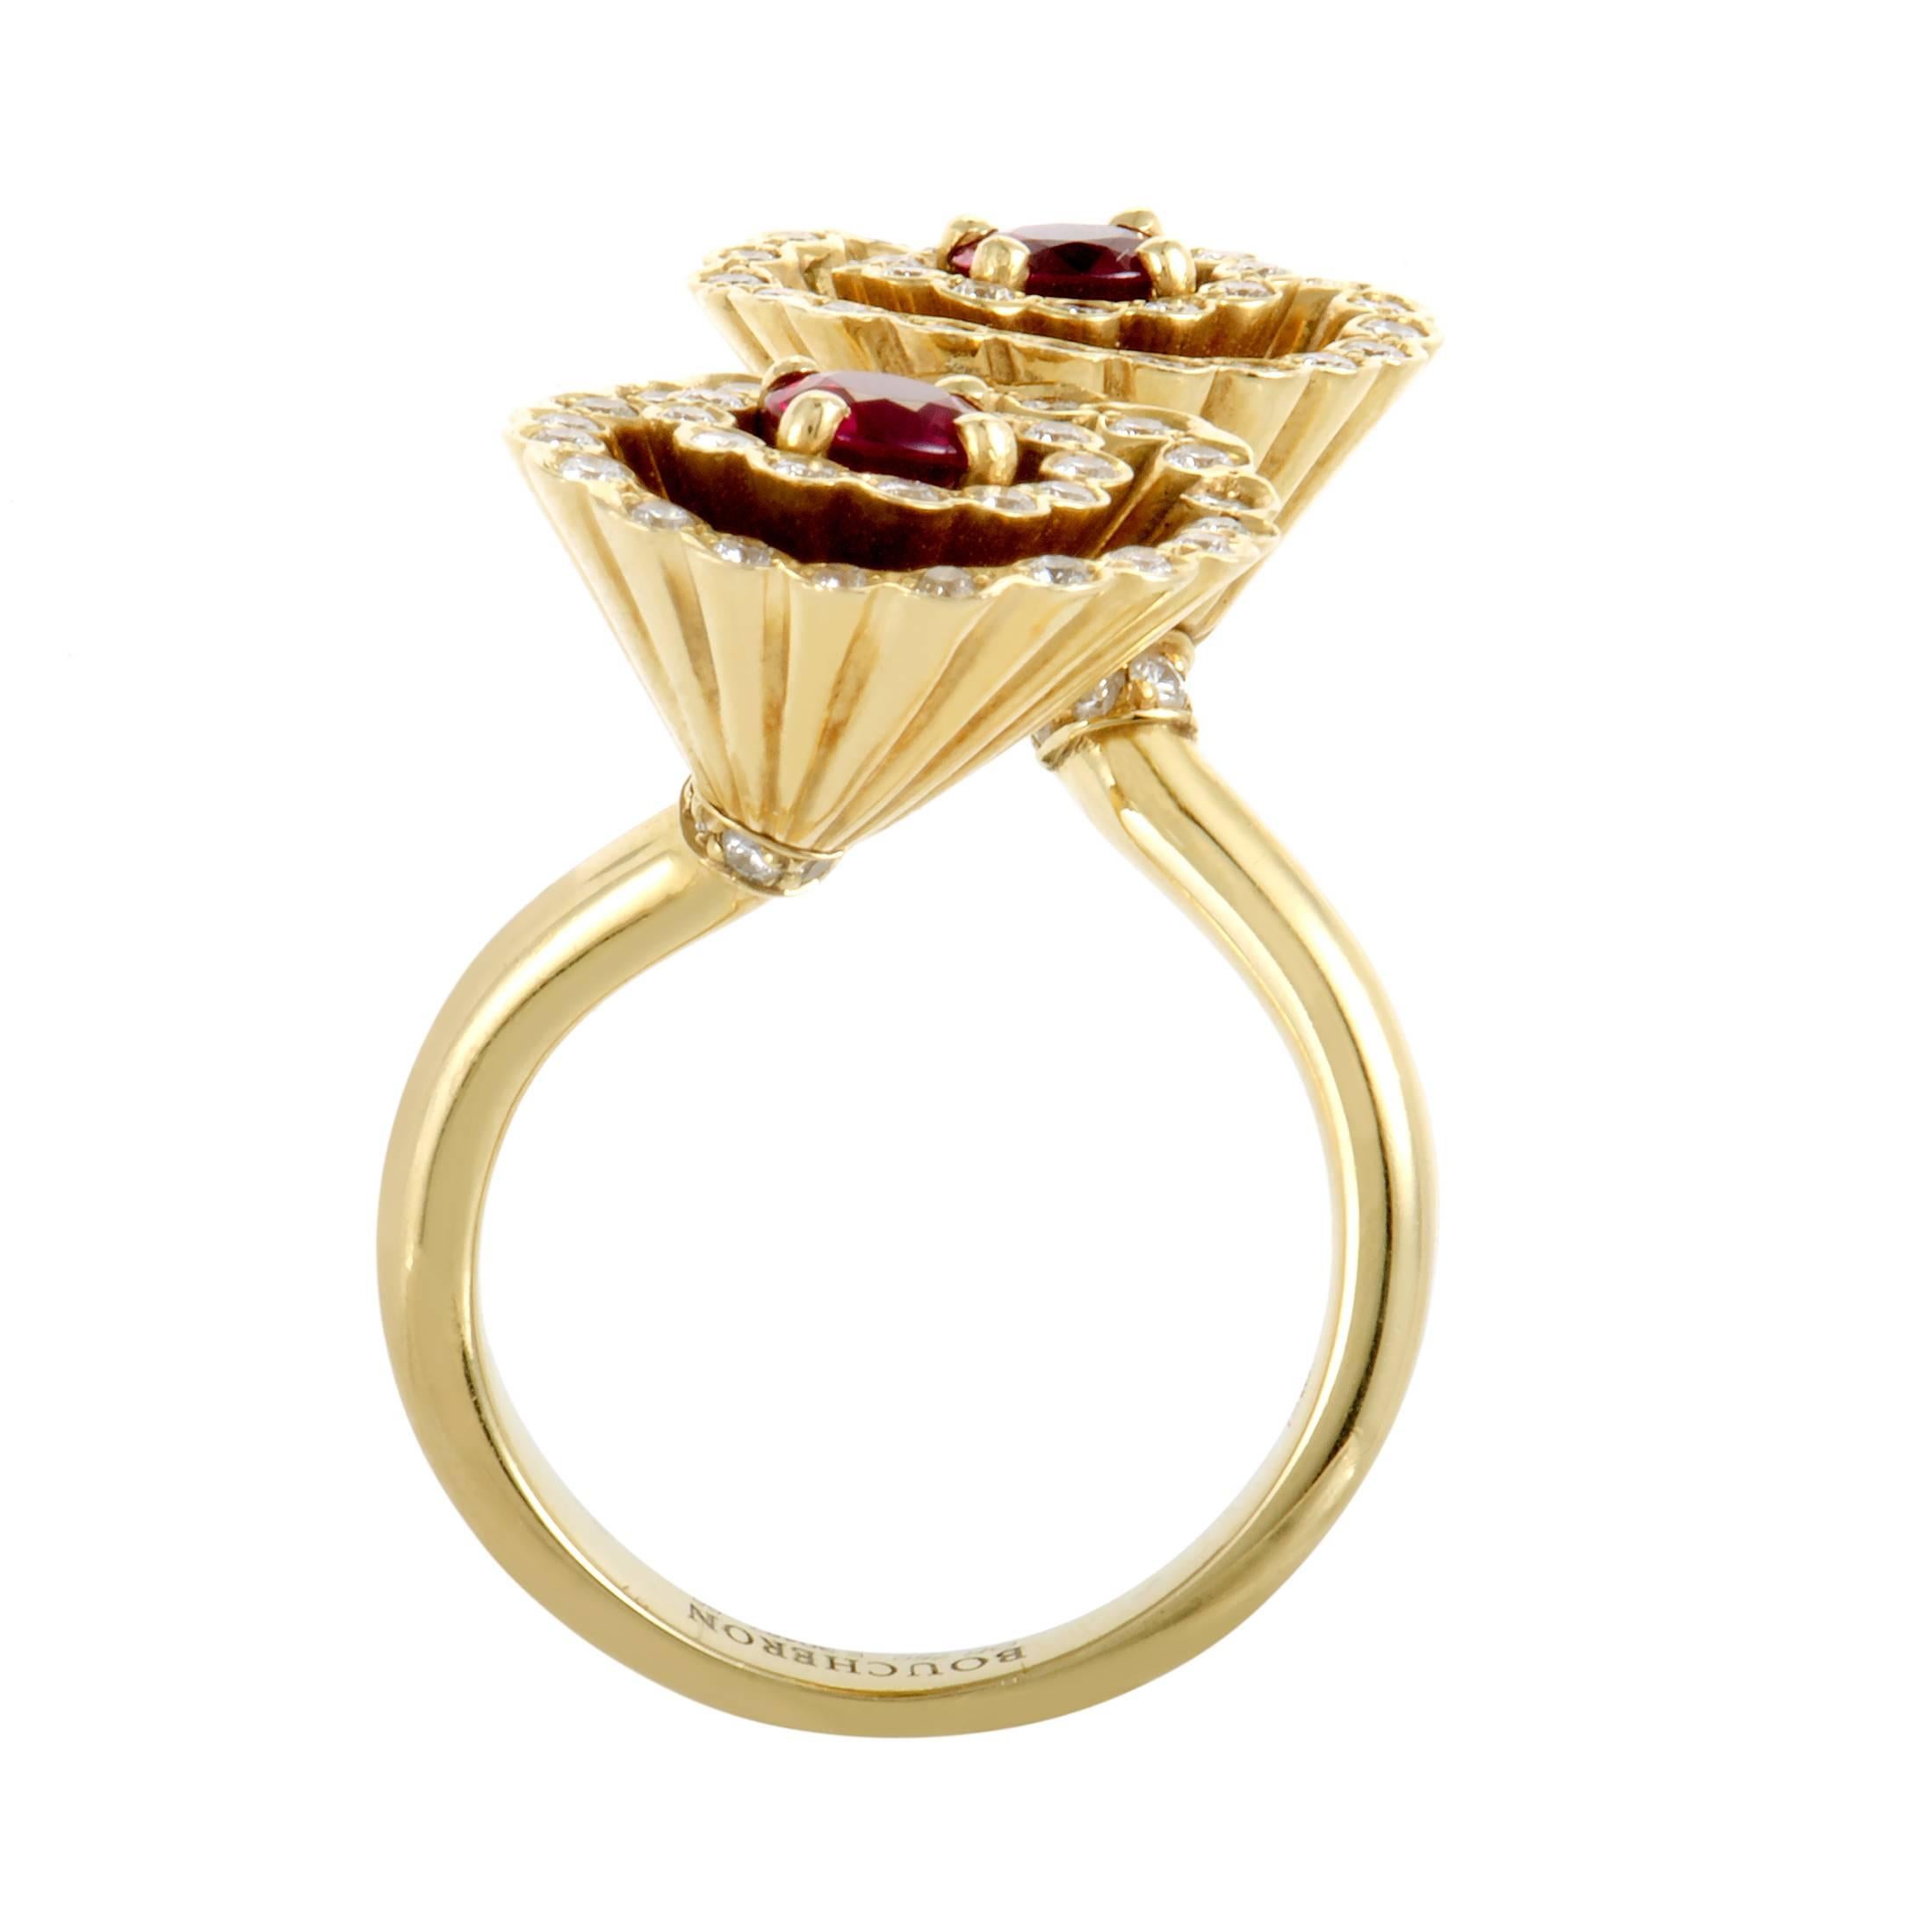 Placed in the middle of wonderfully intriguing shapes and encircled by scintillating arrangements of lustrous diamonds weighing in total 1.00 carat, the precious rubies totaling 0.80ct exude a fabulous allure in this gorgeous 18K yellow gold ring